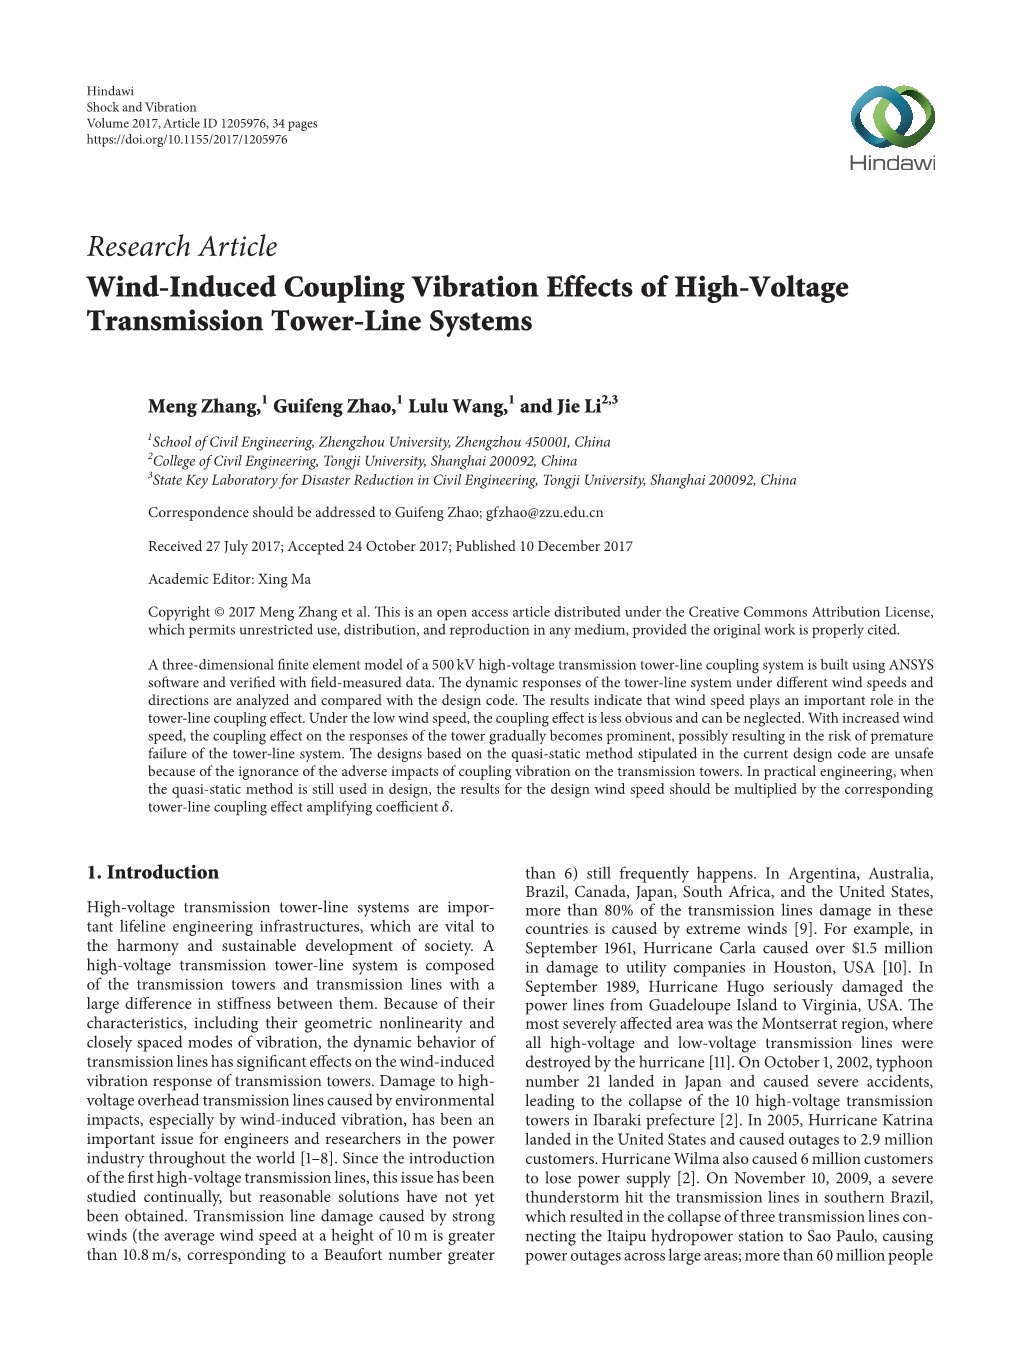 Wind-Induced Coupling Vibration Effects of High-Voltage Transmission Tower-Line Systems